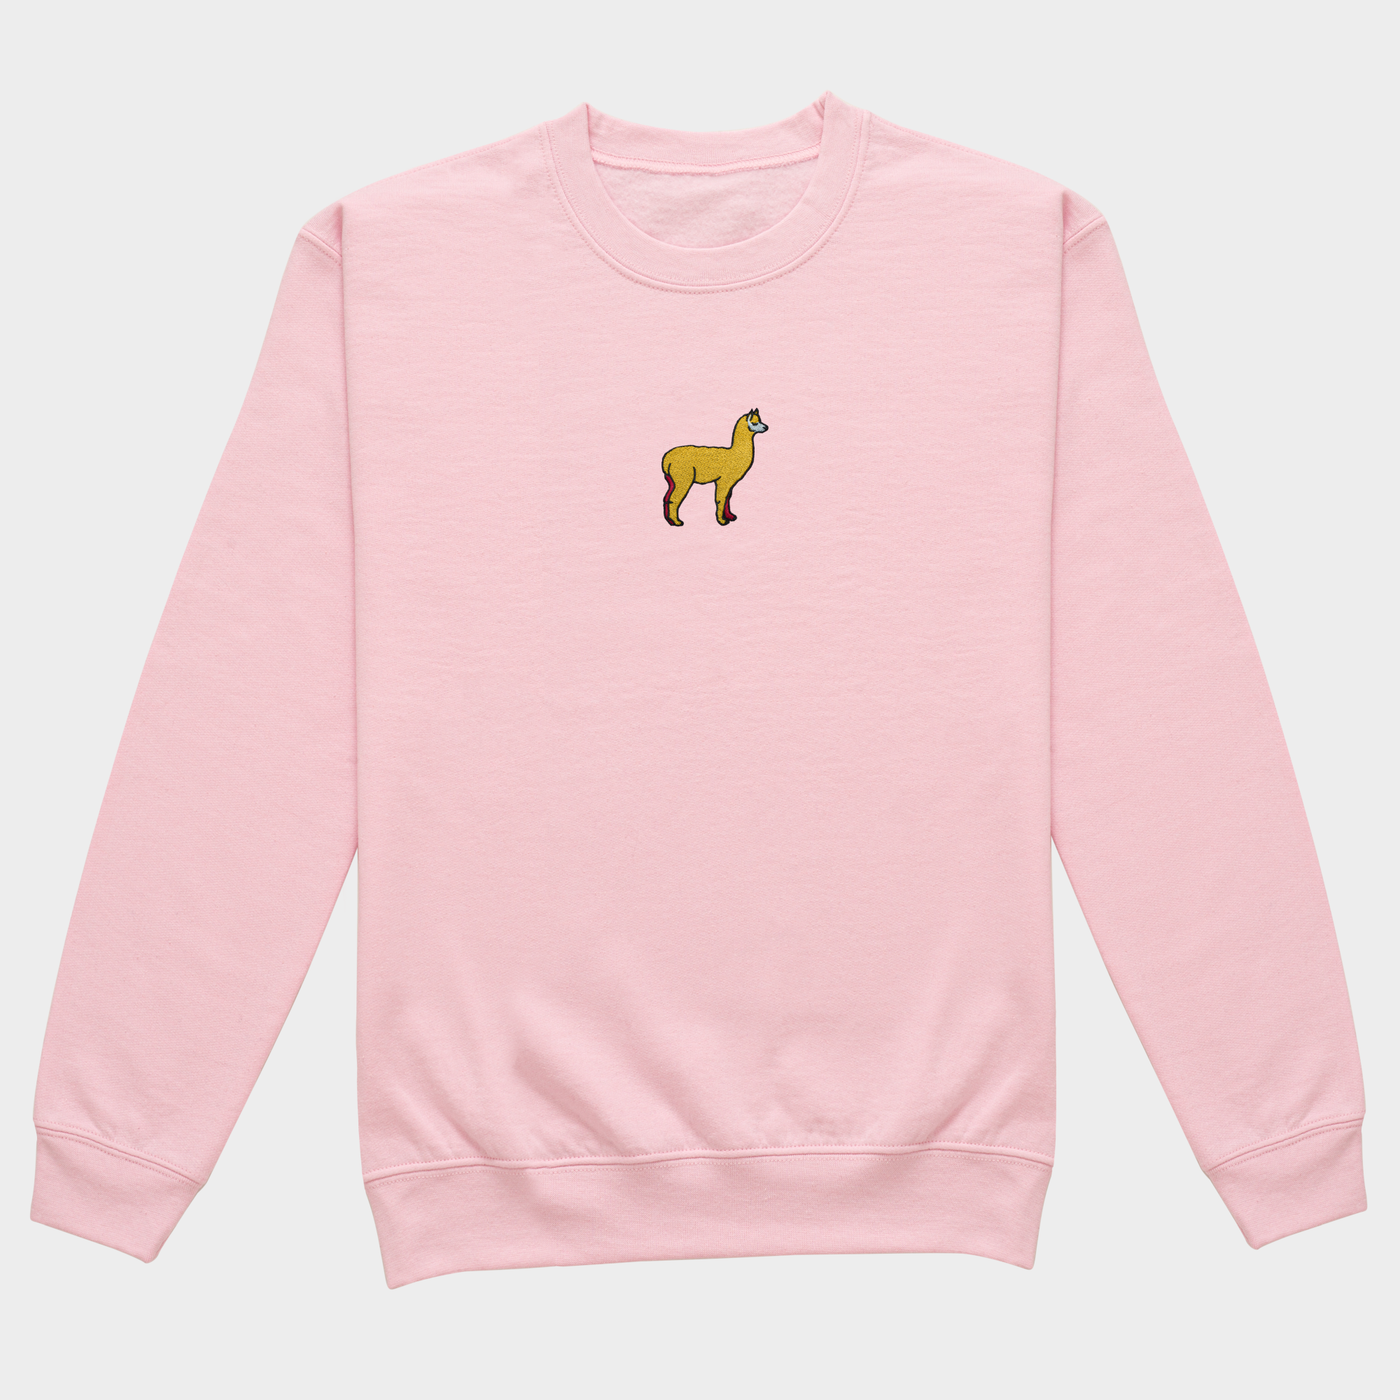 Bobby's Planet Women's Embroidered Alpaca Sweatshirt from South American Amazon Animals Collection in Light Pink Color#color_light-pink